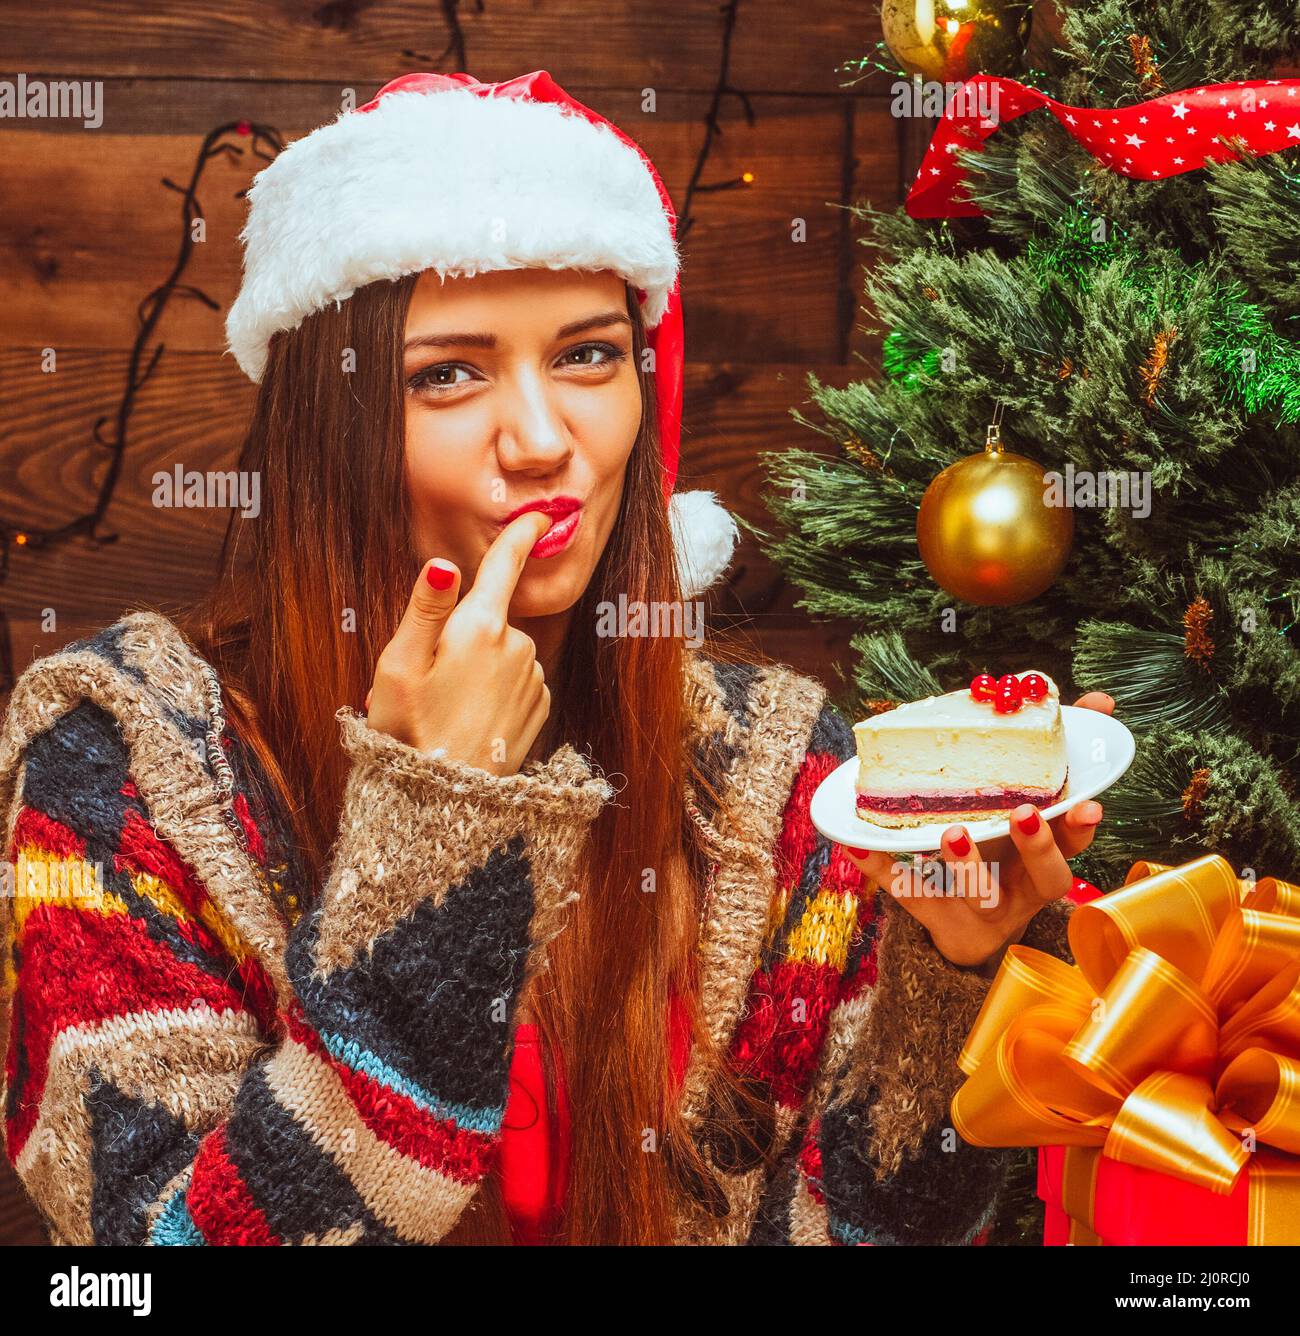 Bright lady holding a plate with a slice of cake and tasting it, finger in the mouth, Christmas Eve, Christmas dinner, Christmas Stock Photo